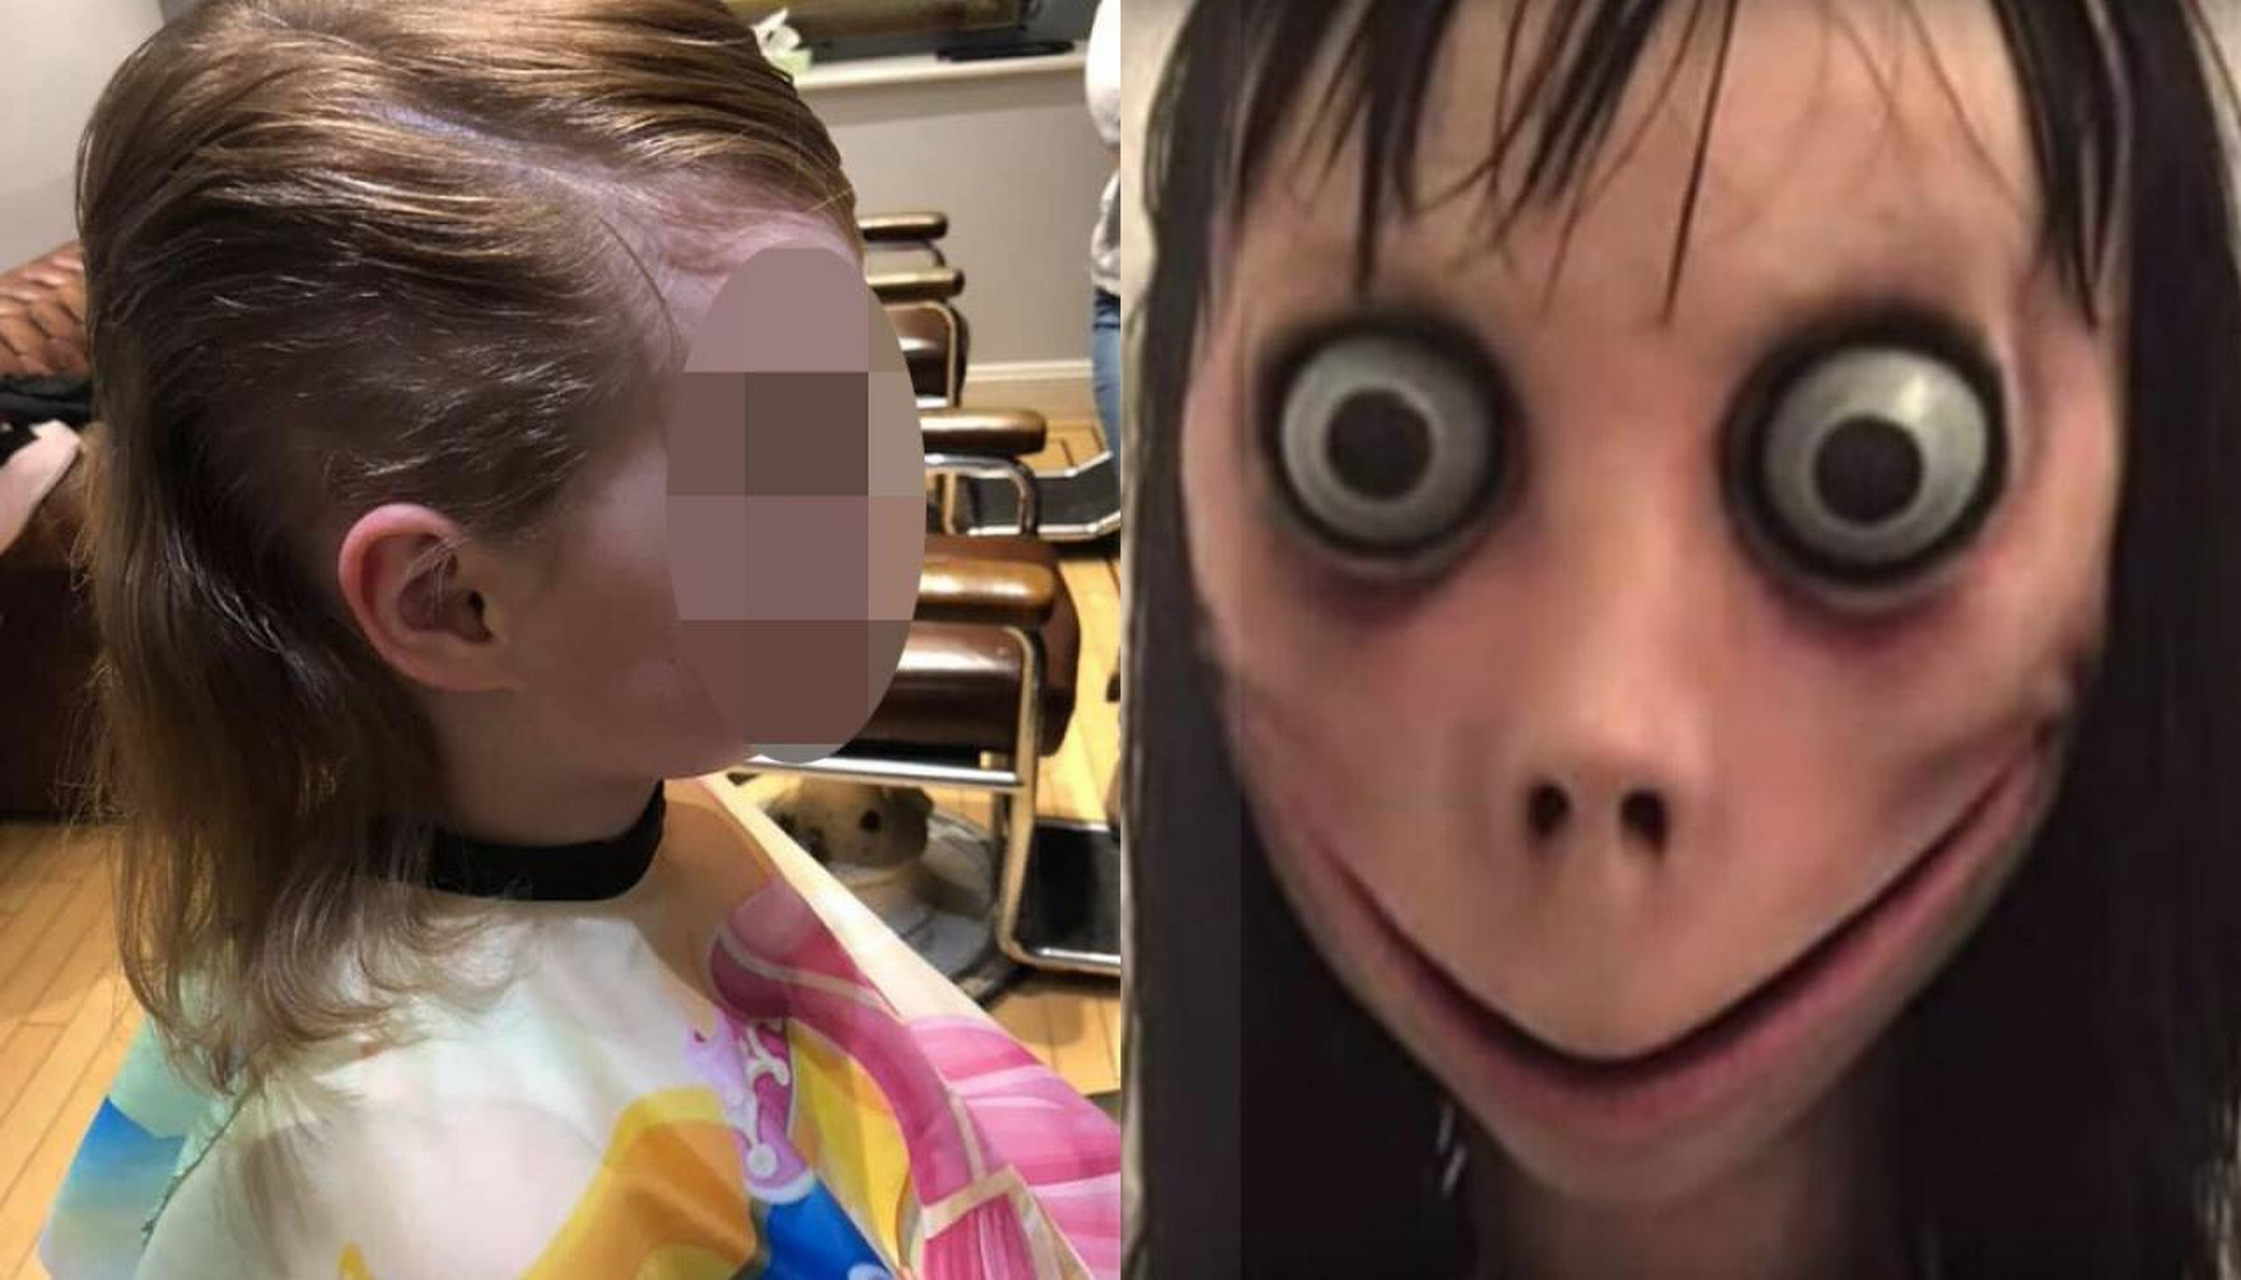 Momo Challenge isn't real: How parents can deal with internet hoaxes ...